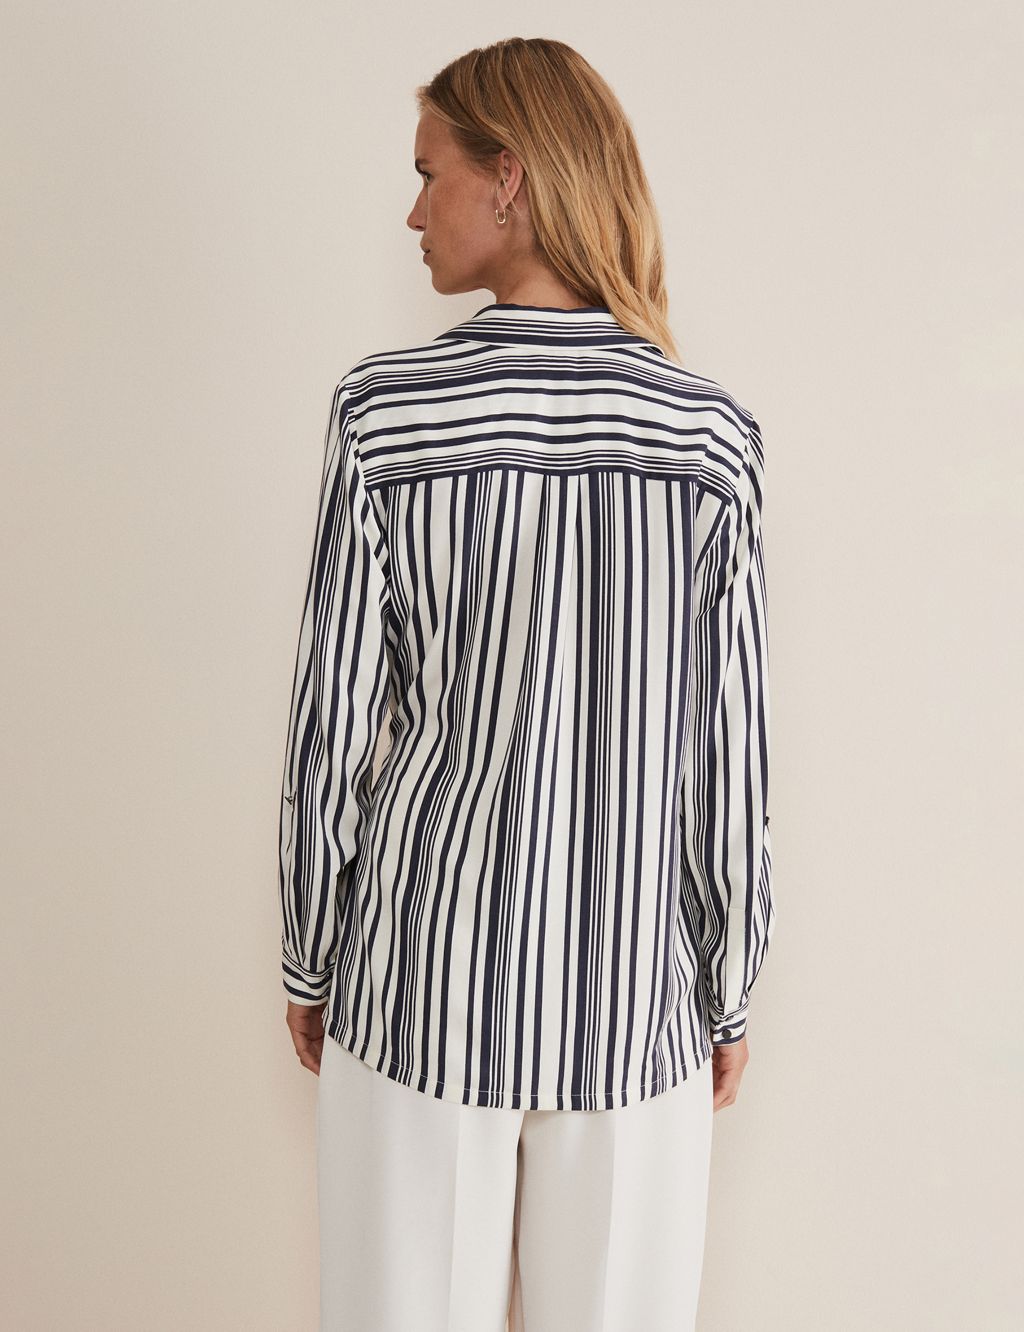 Striped Collared V-Neck Tie Front Blouse image 2